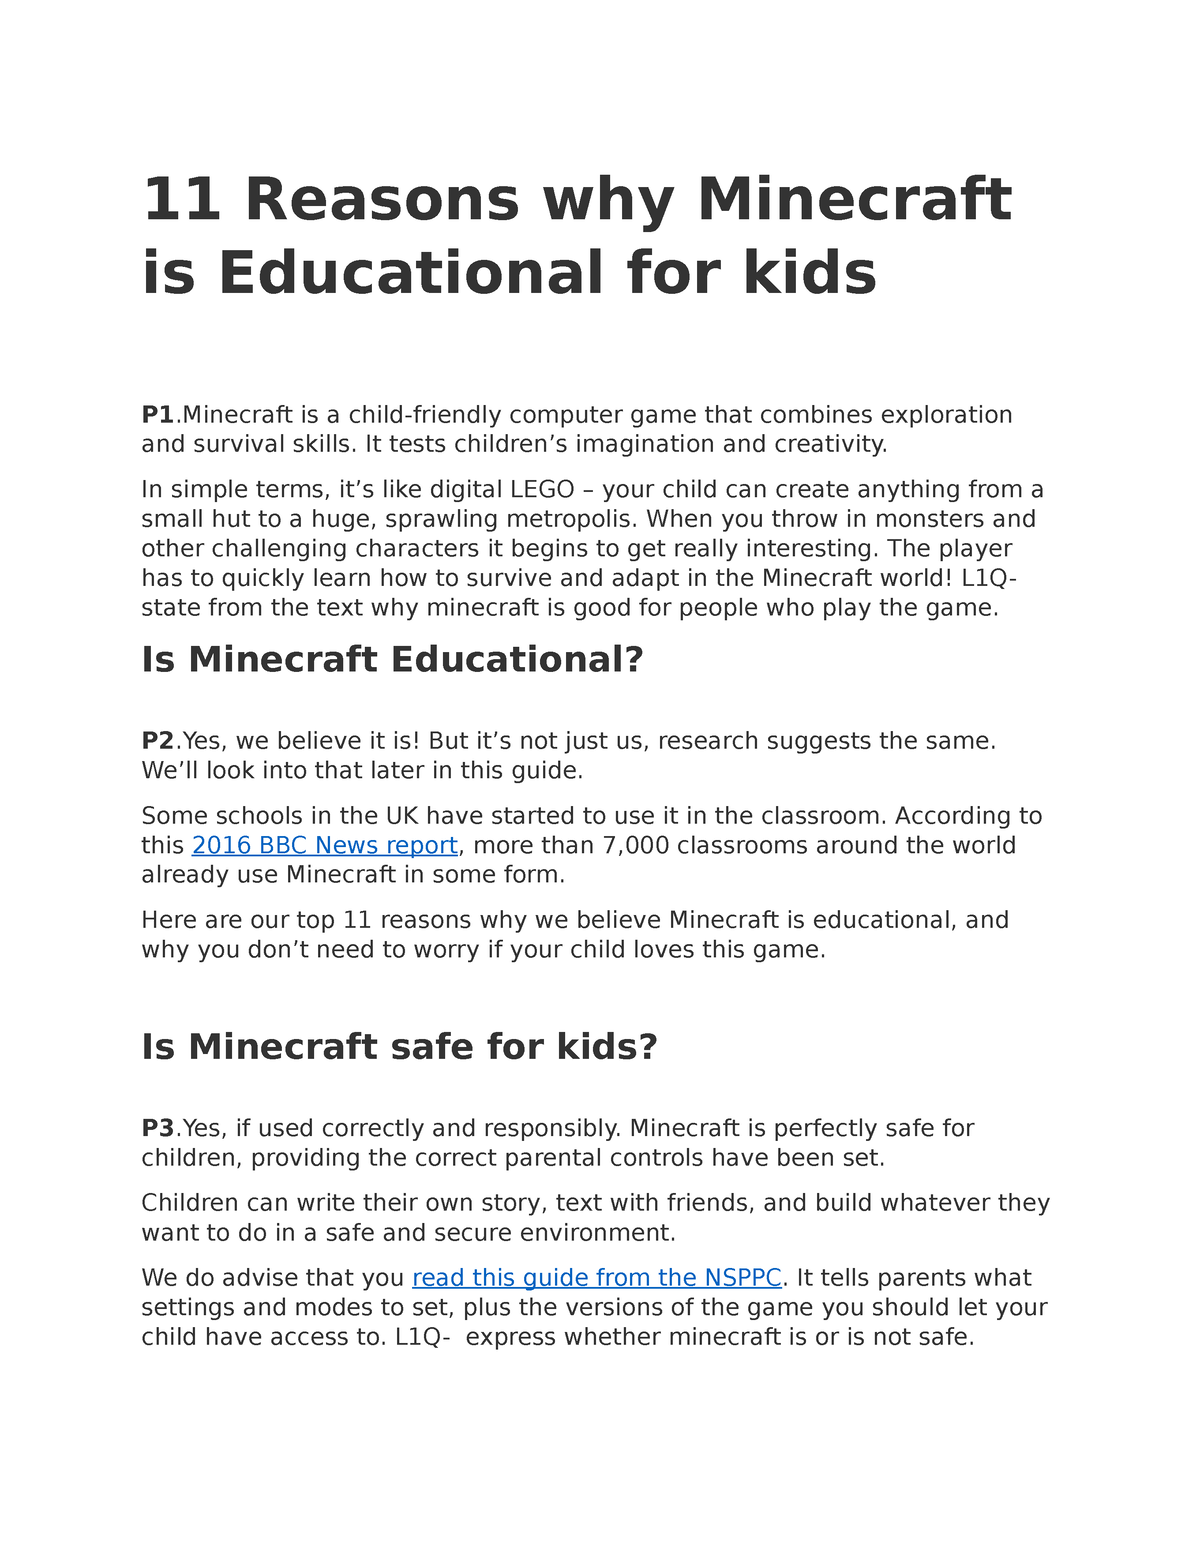 11 Reasons why Minecraft is educational for kids